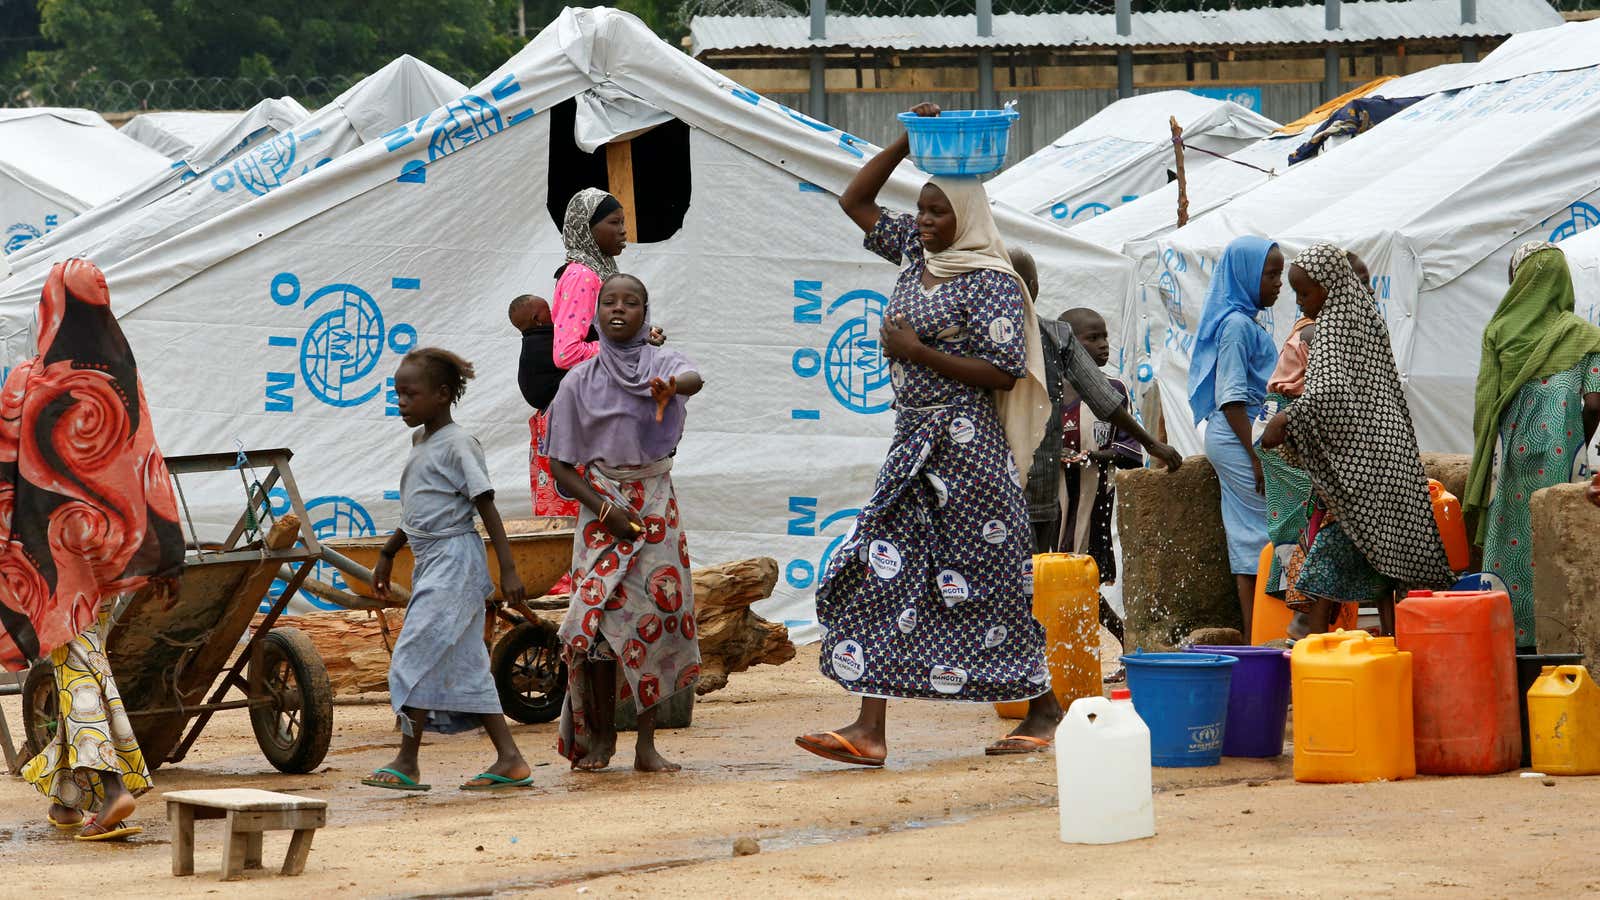 Borno state holds the most displaced people in Nigeria.